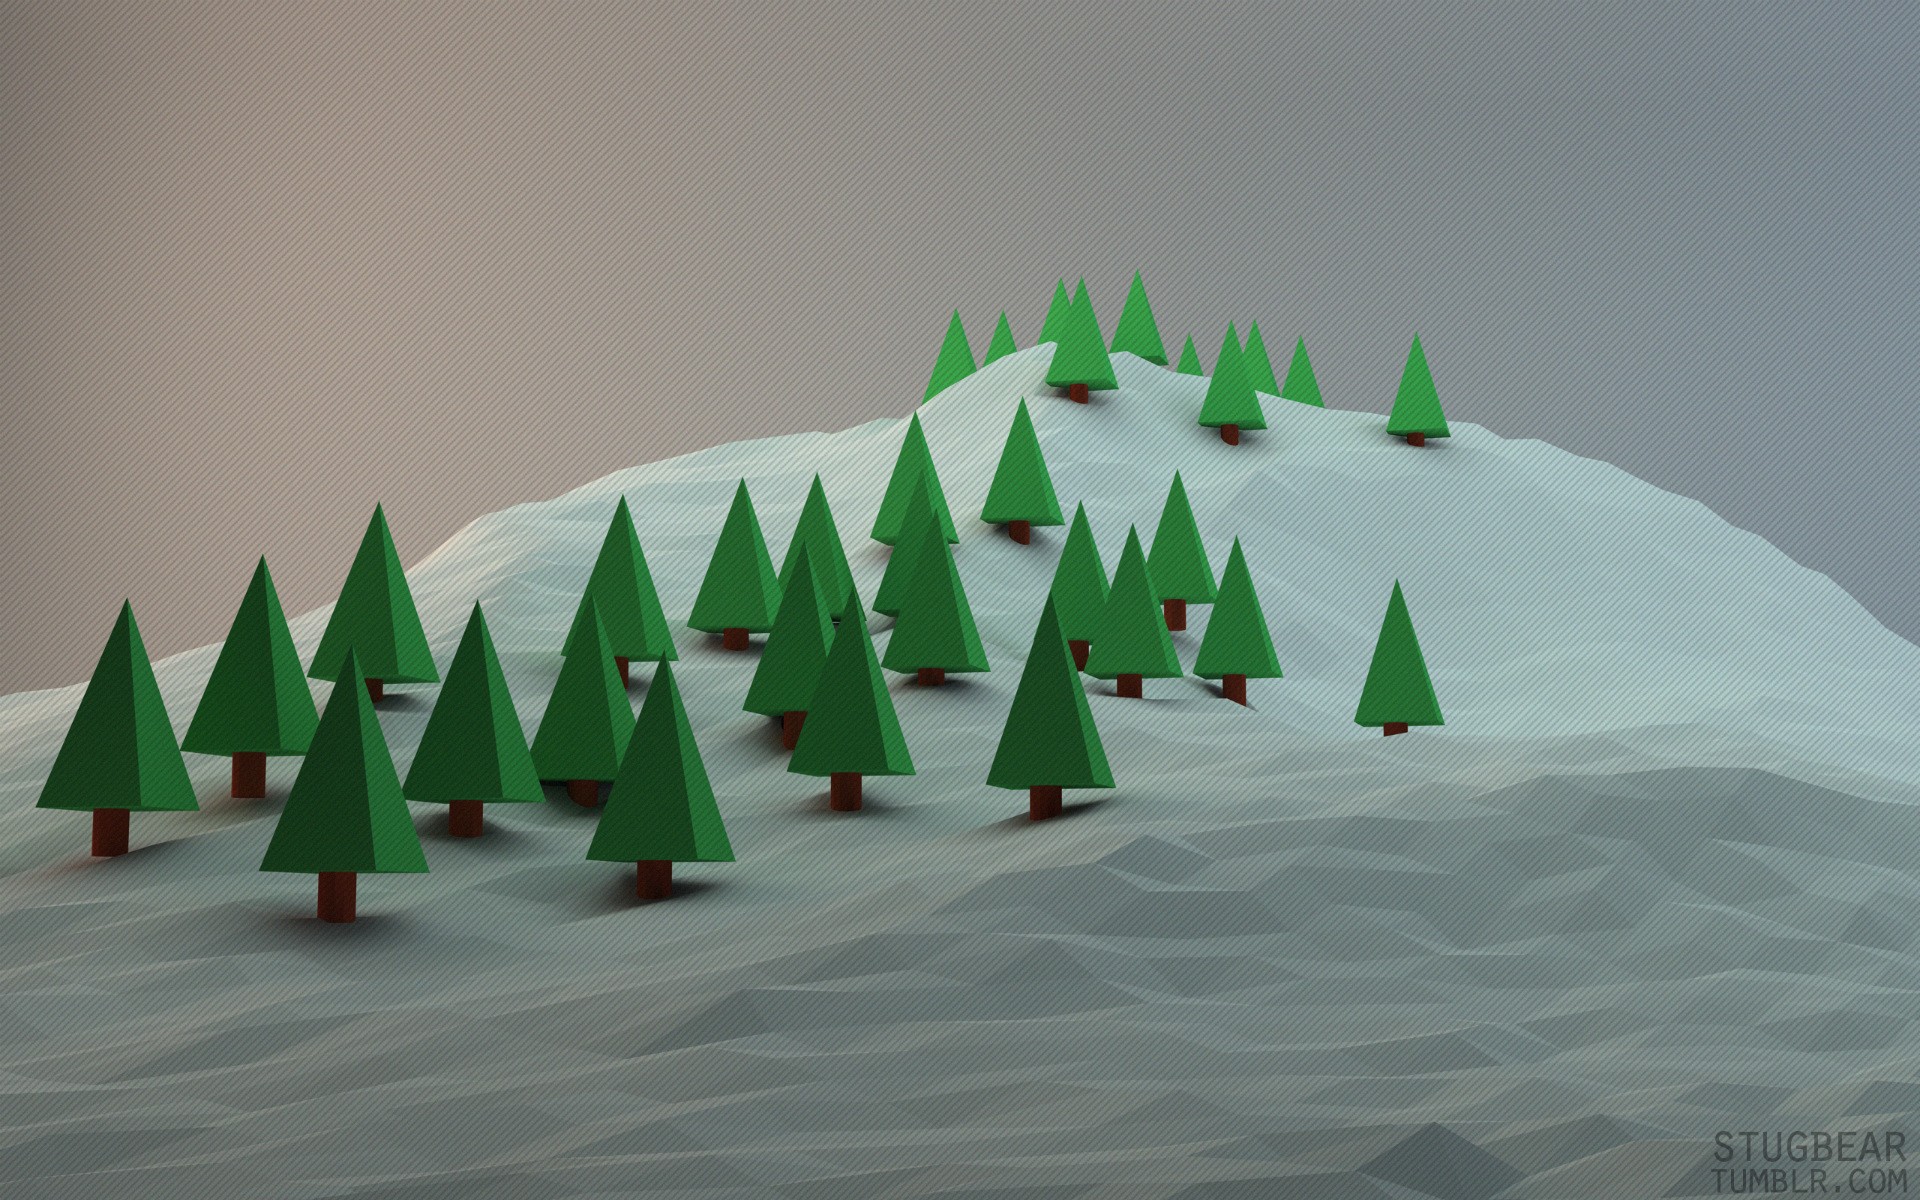 General 1920x1200 low poly simple background trees digital art